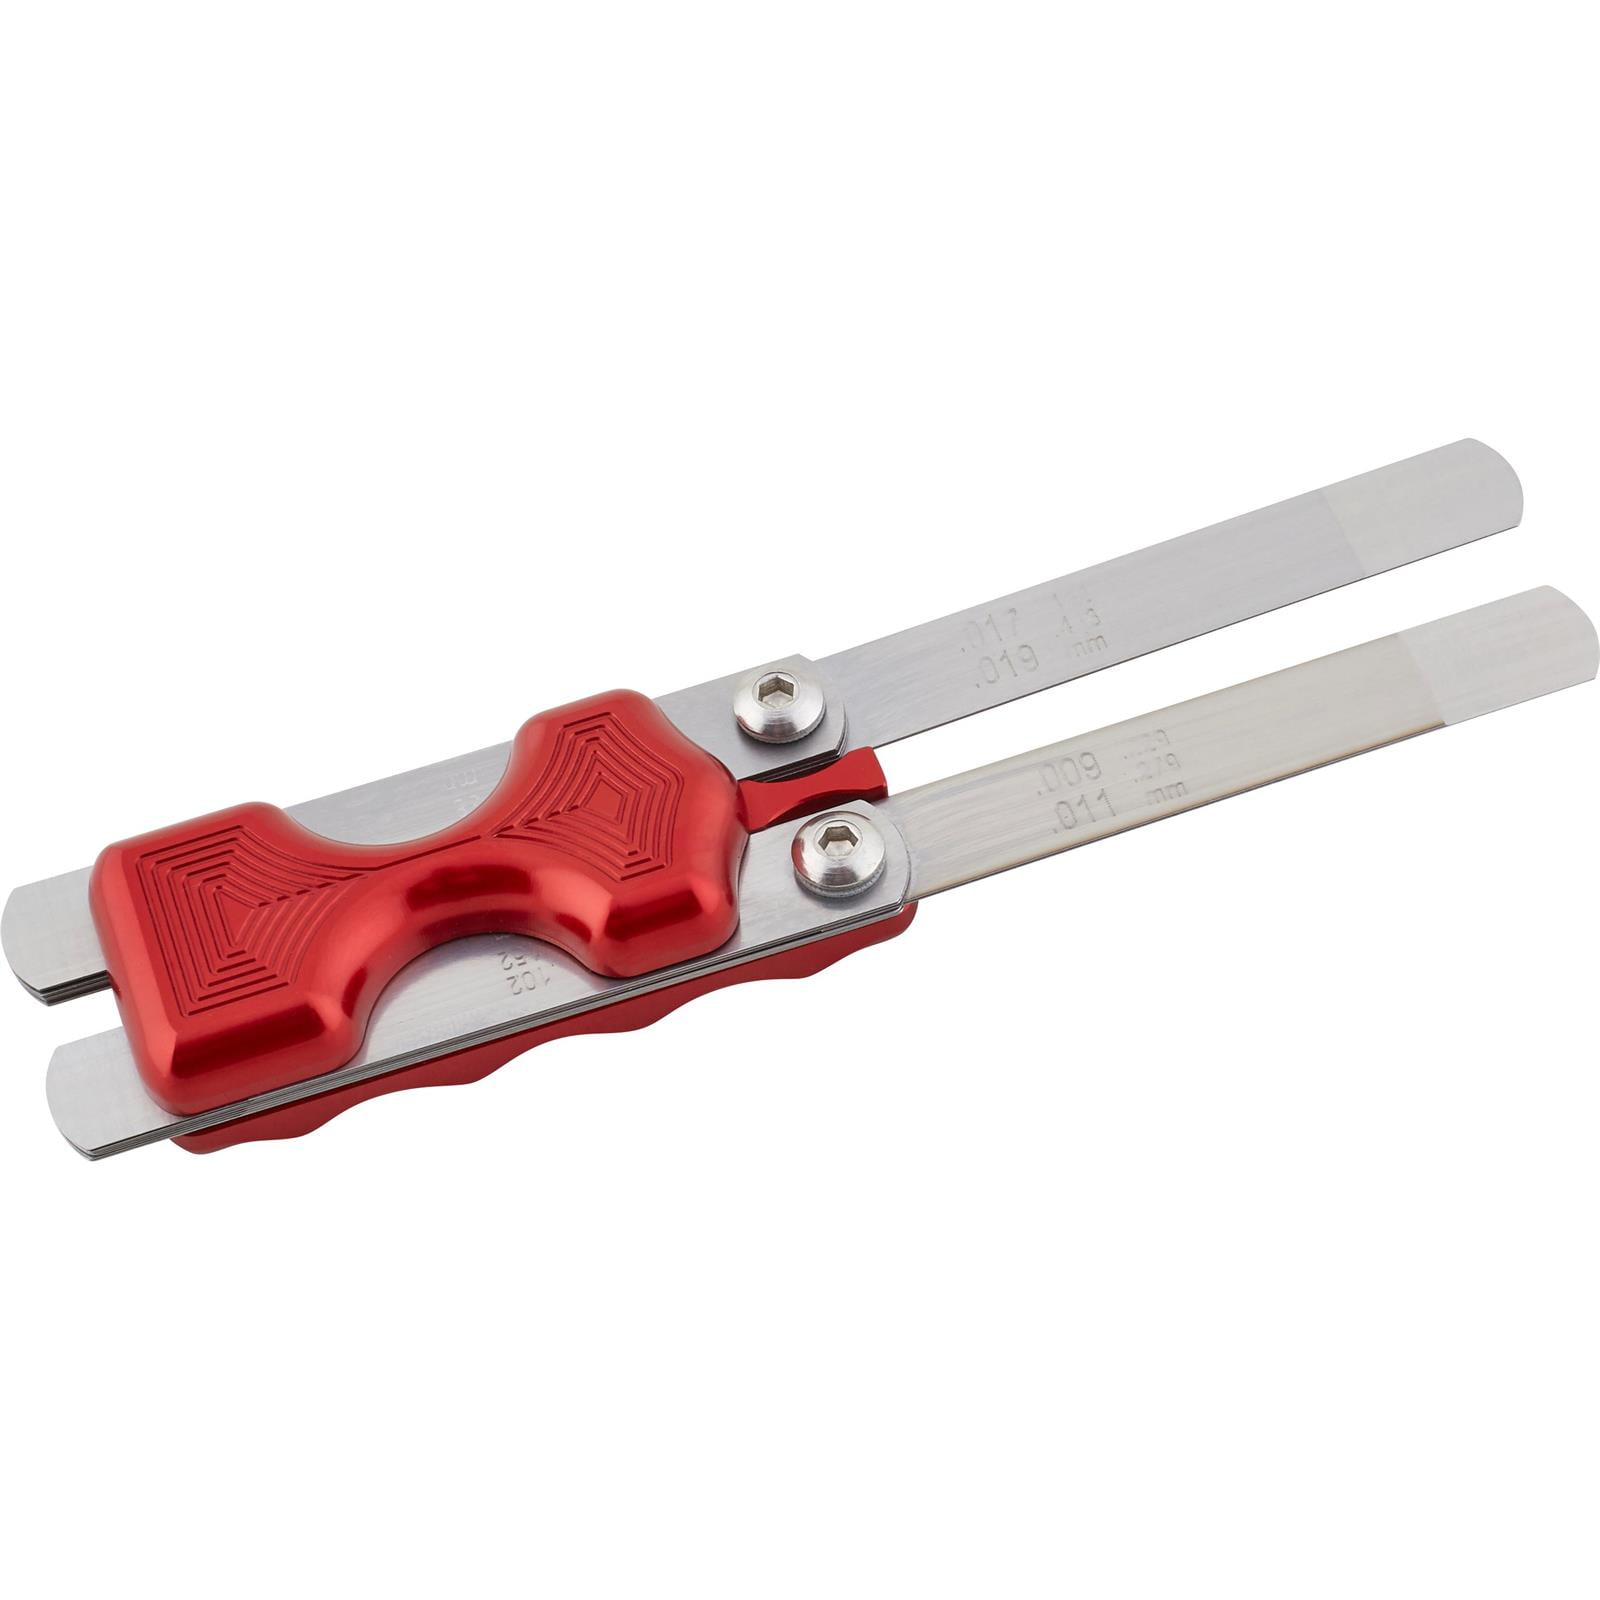 LSM Racing Products FH-200R Red Dual Feeler Gauge Holder